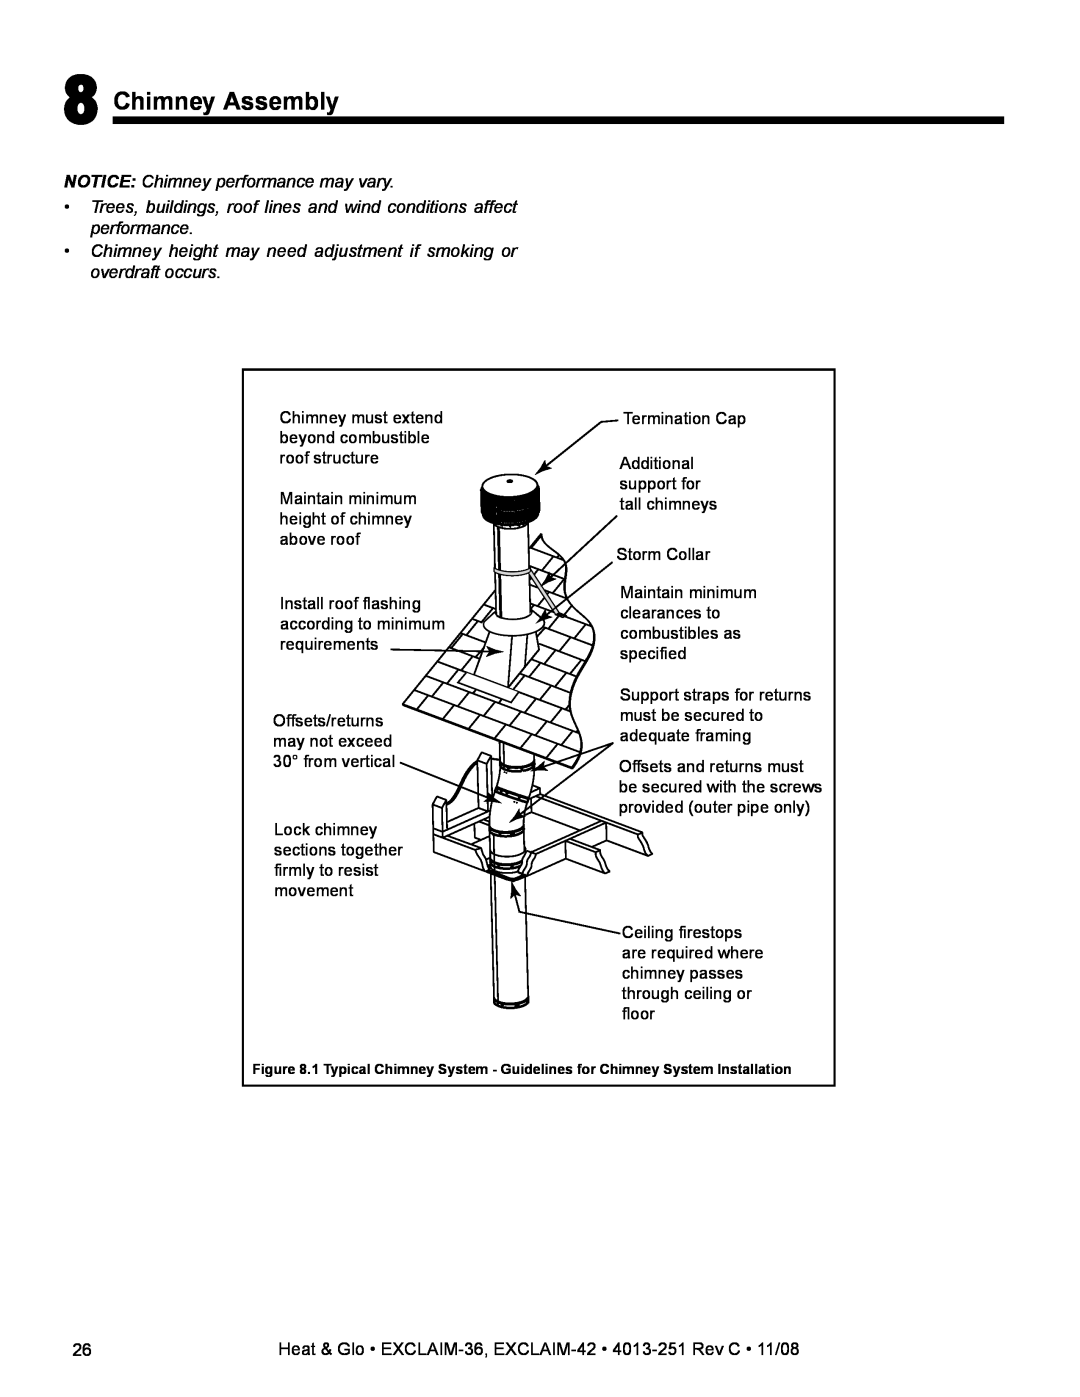 Hearth and Home Technologies EXCLAIM-36 owner manual Chimney Assembly, NOTICE Chimney performance may vary 